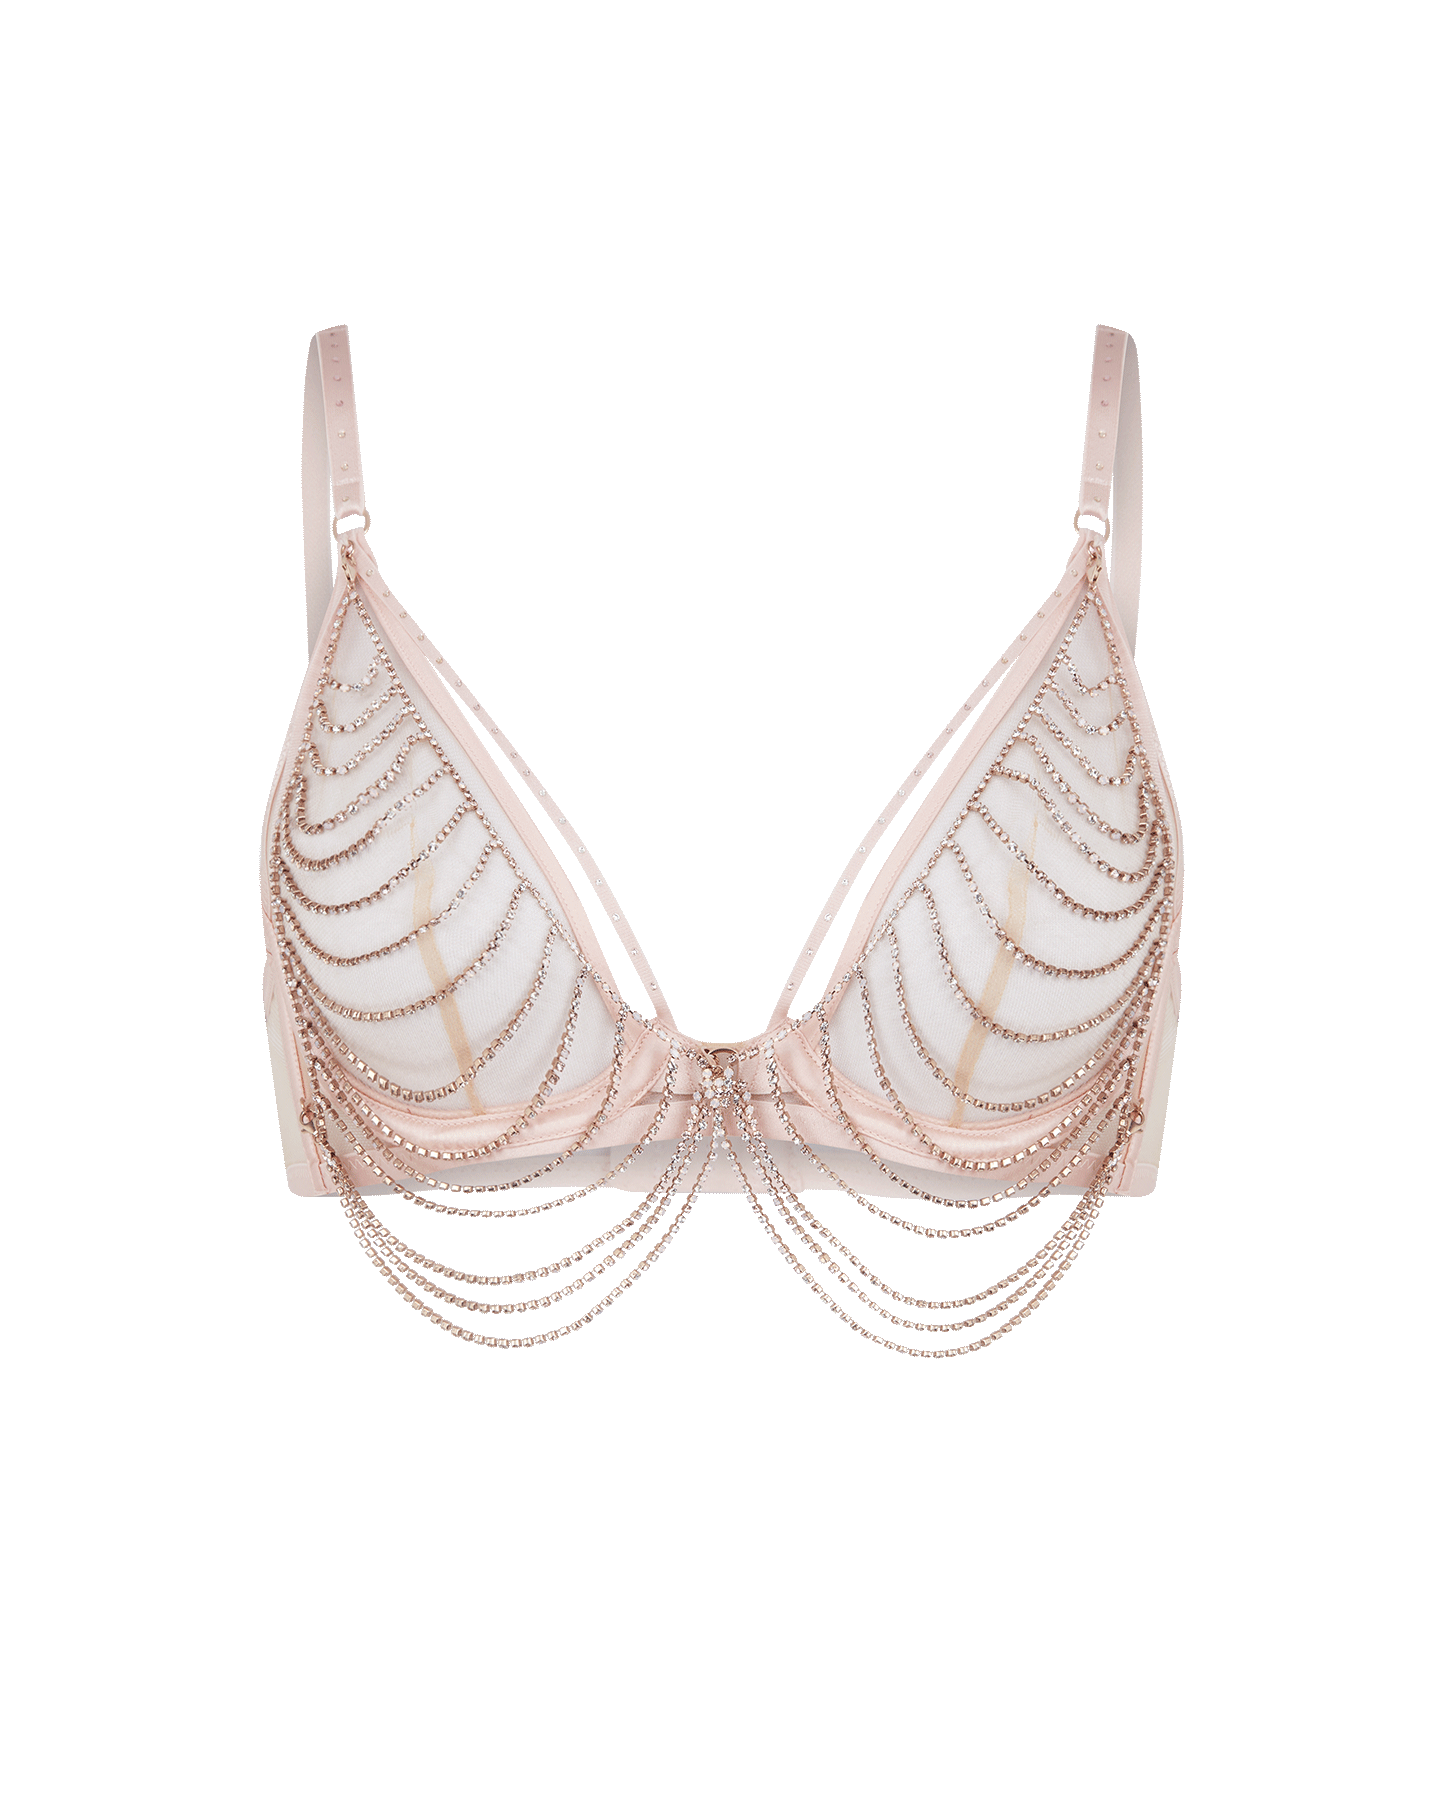 Female Woman Pink Bra Brassiere on Hanger in Store of Shopping C Stock  Image - Image of pink, casual: 103965747